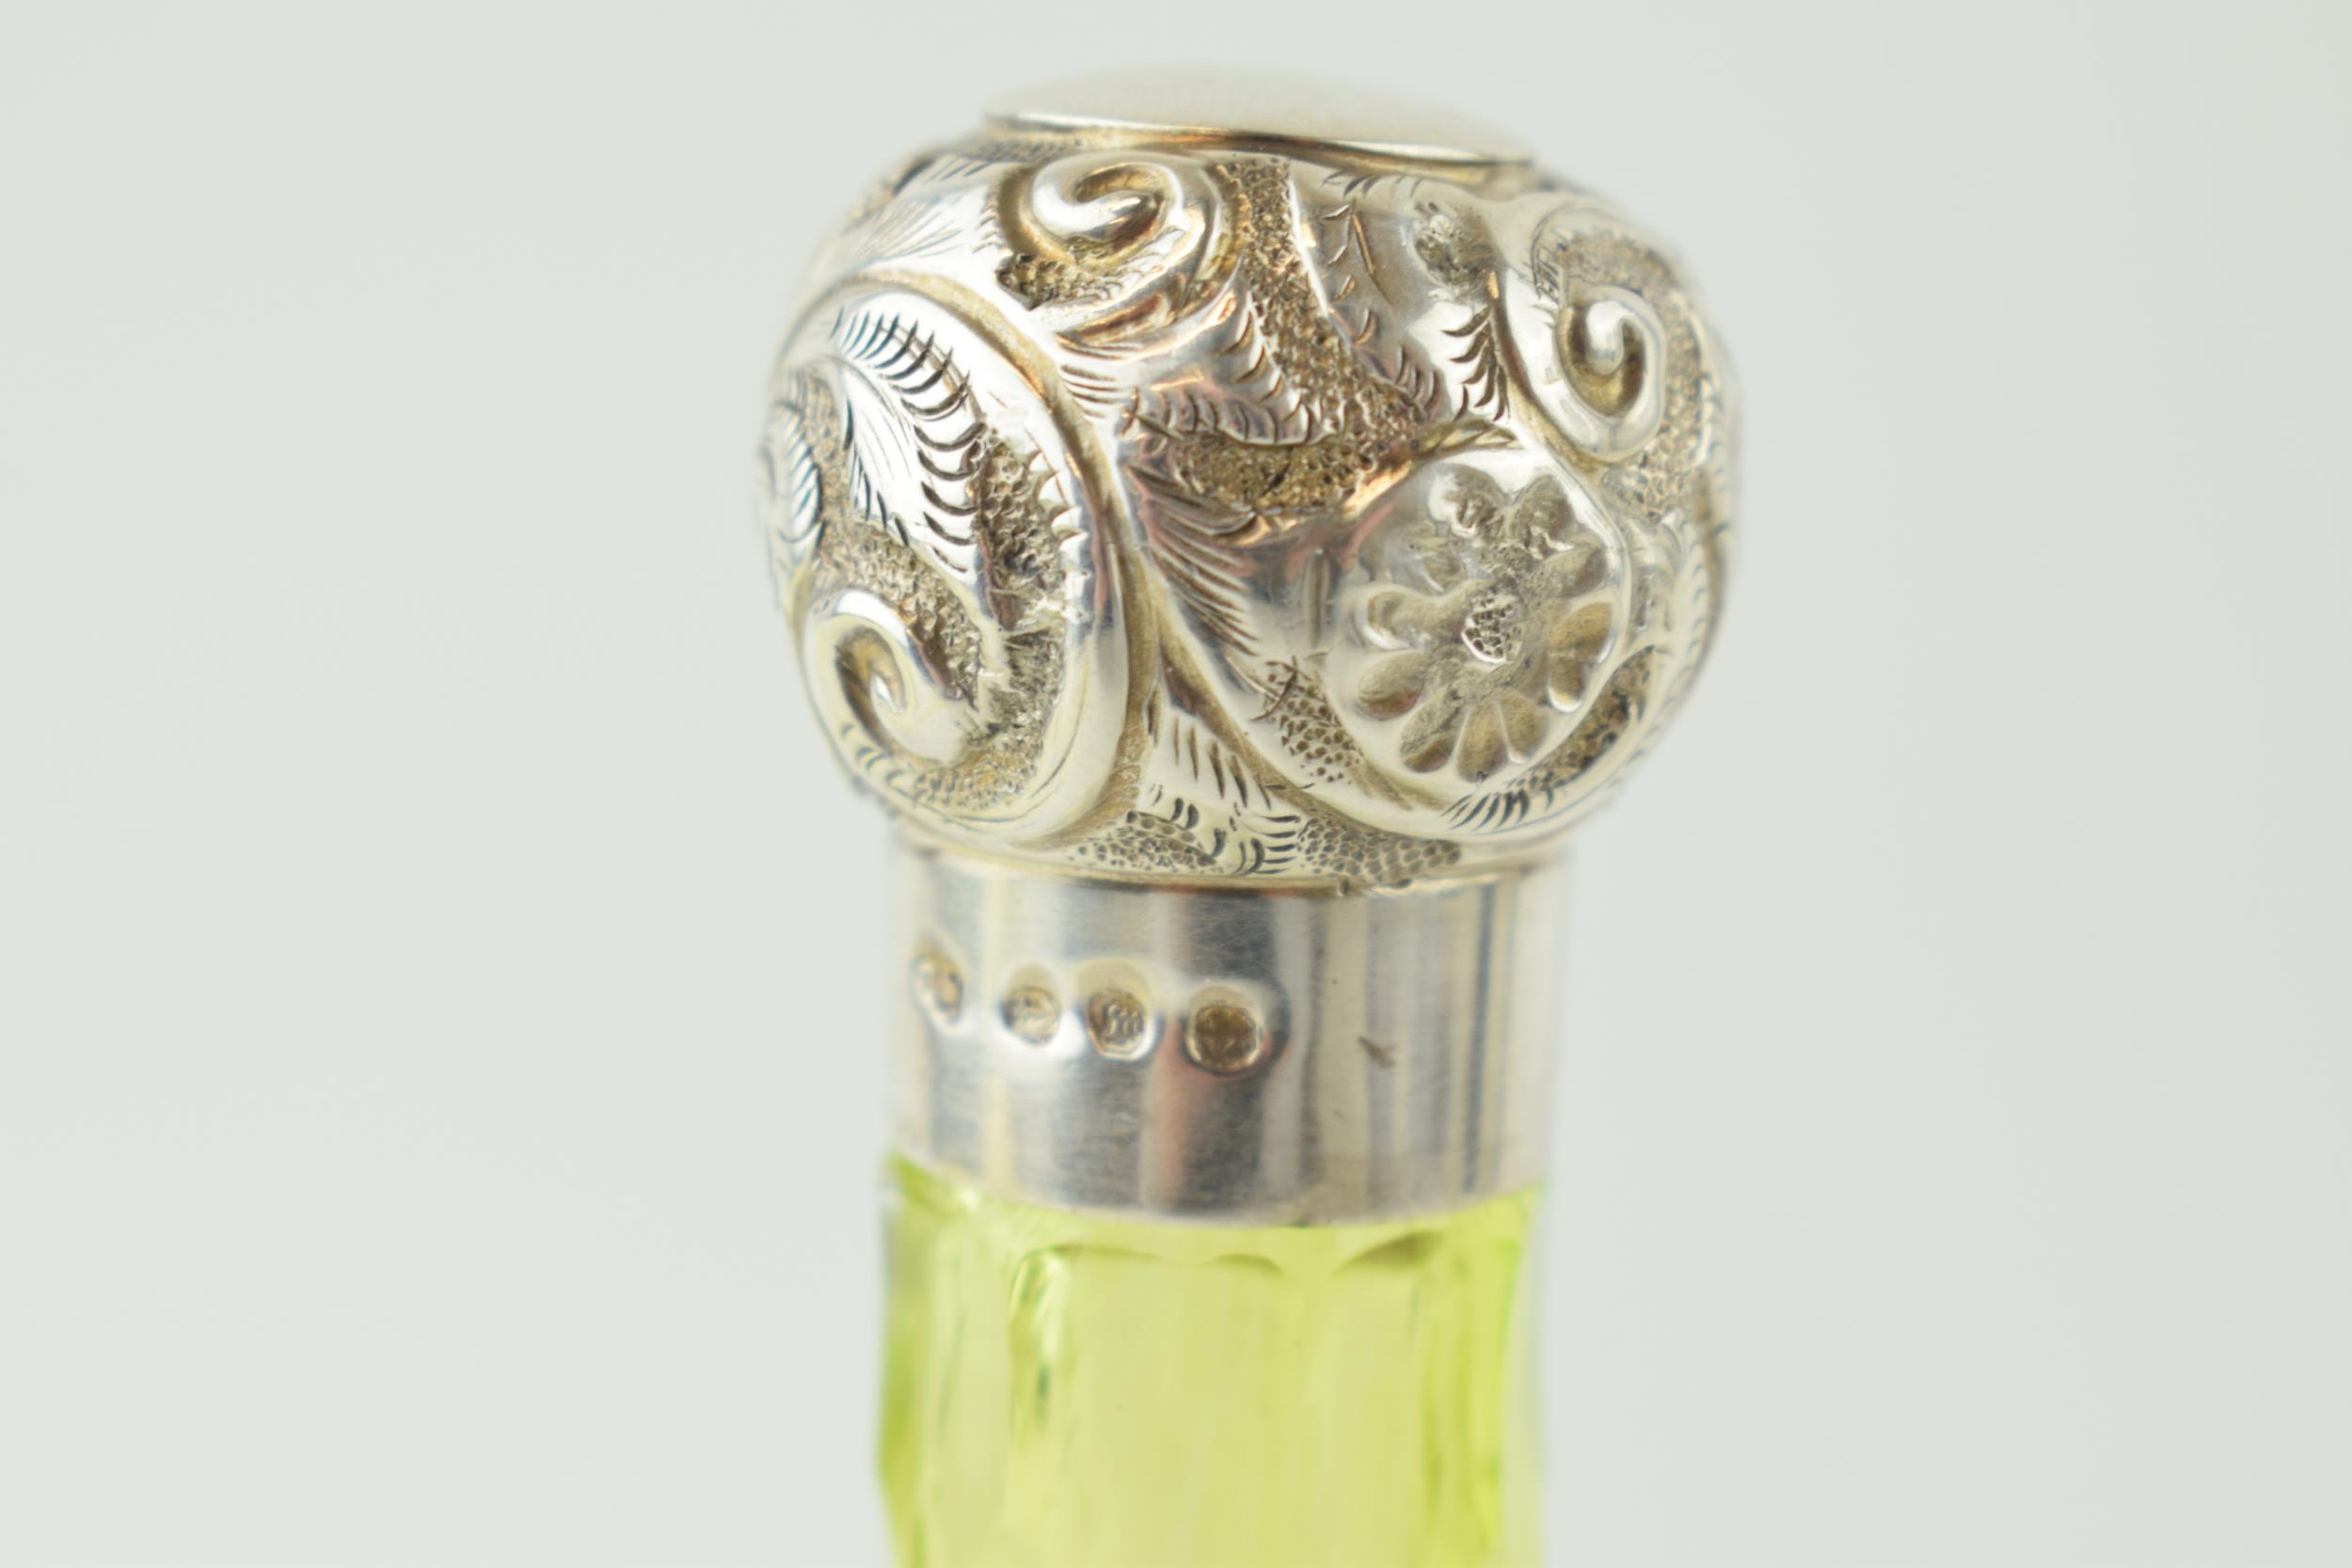 Victorian silver and glass 'pineapple' perfume bottle with green tainted glass, Birm 1896, Chas May, - Image 3 of 3